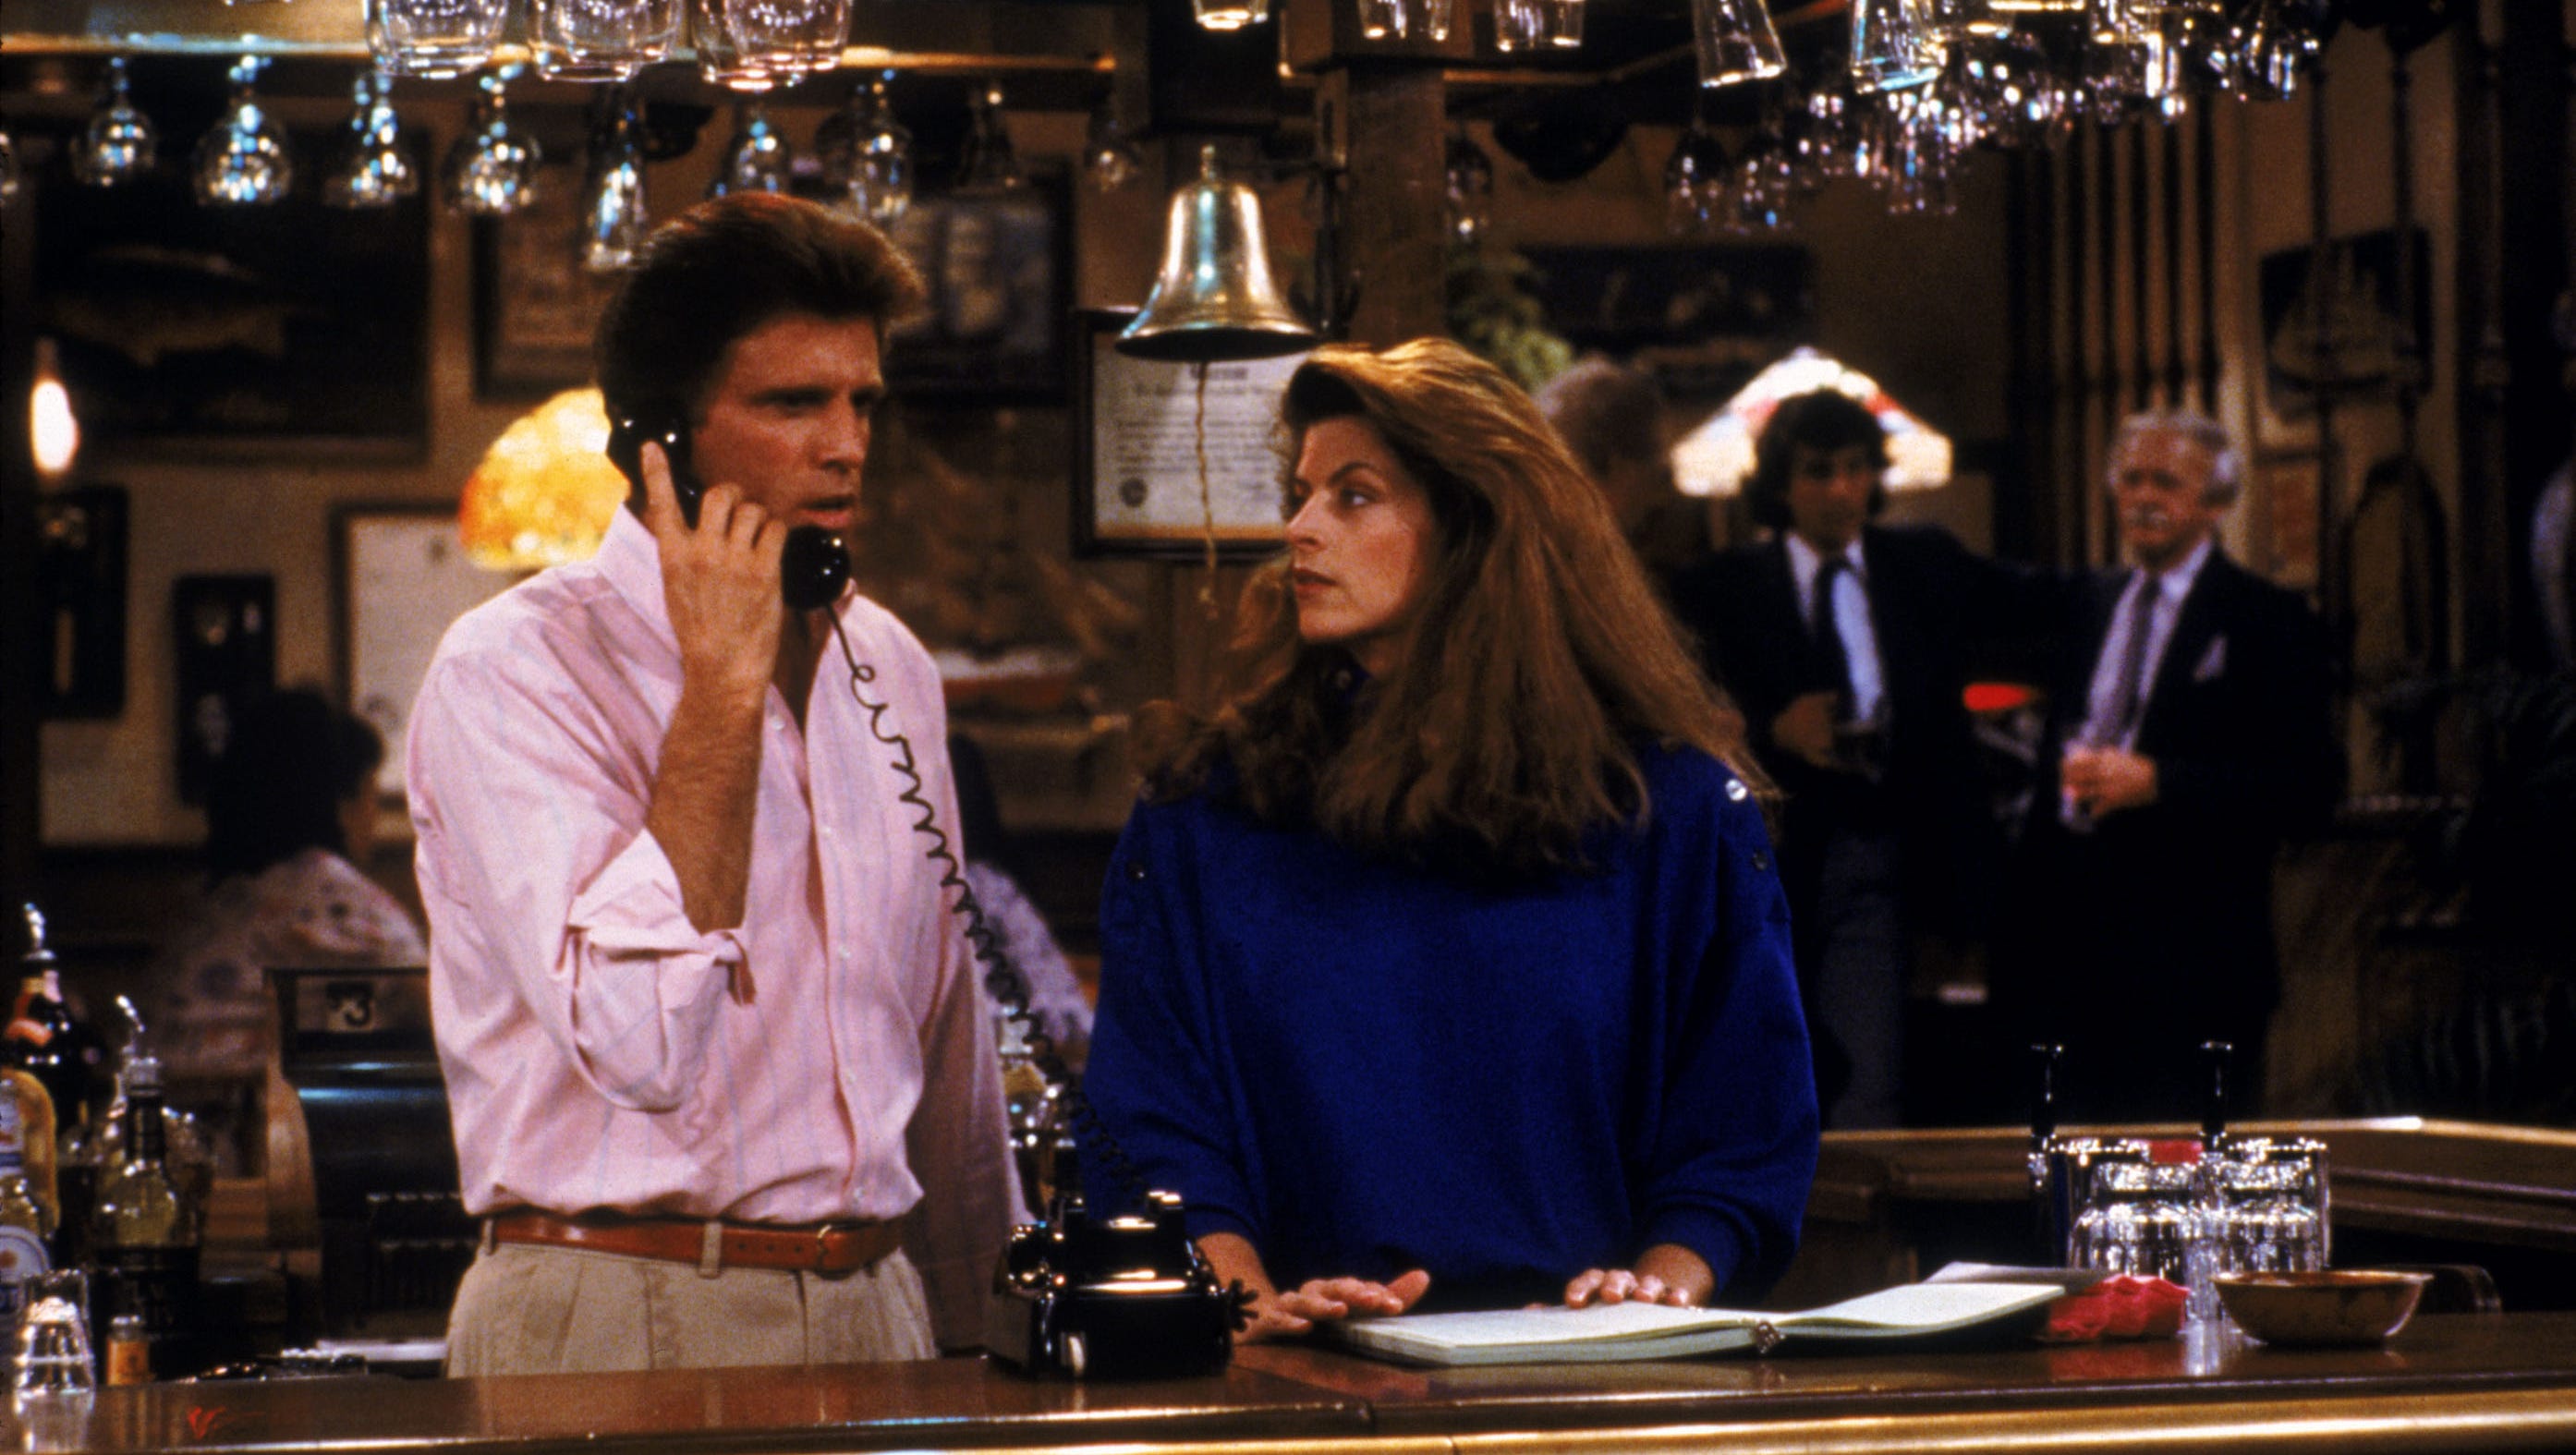 Ted Danson and Kirstie Alley in "Cheers."